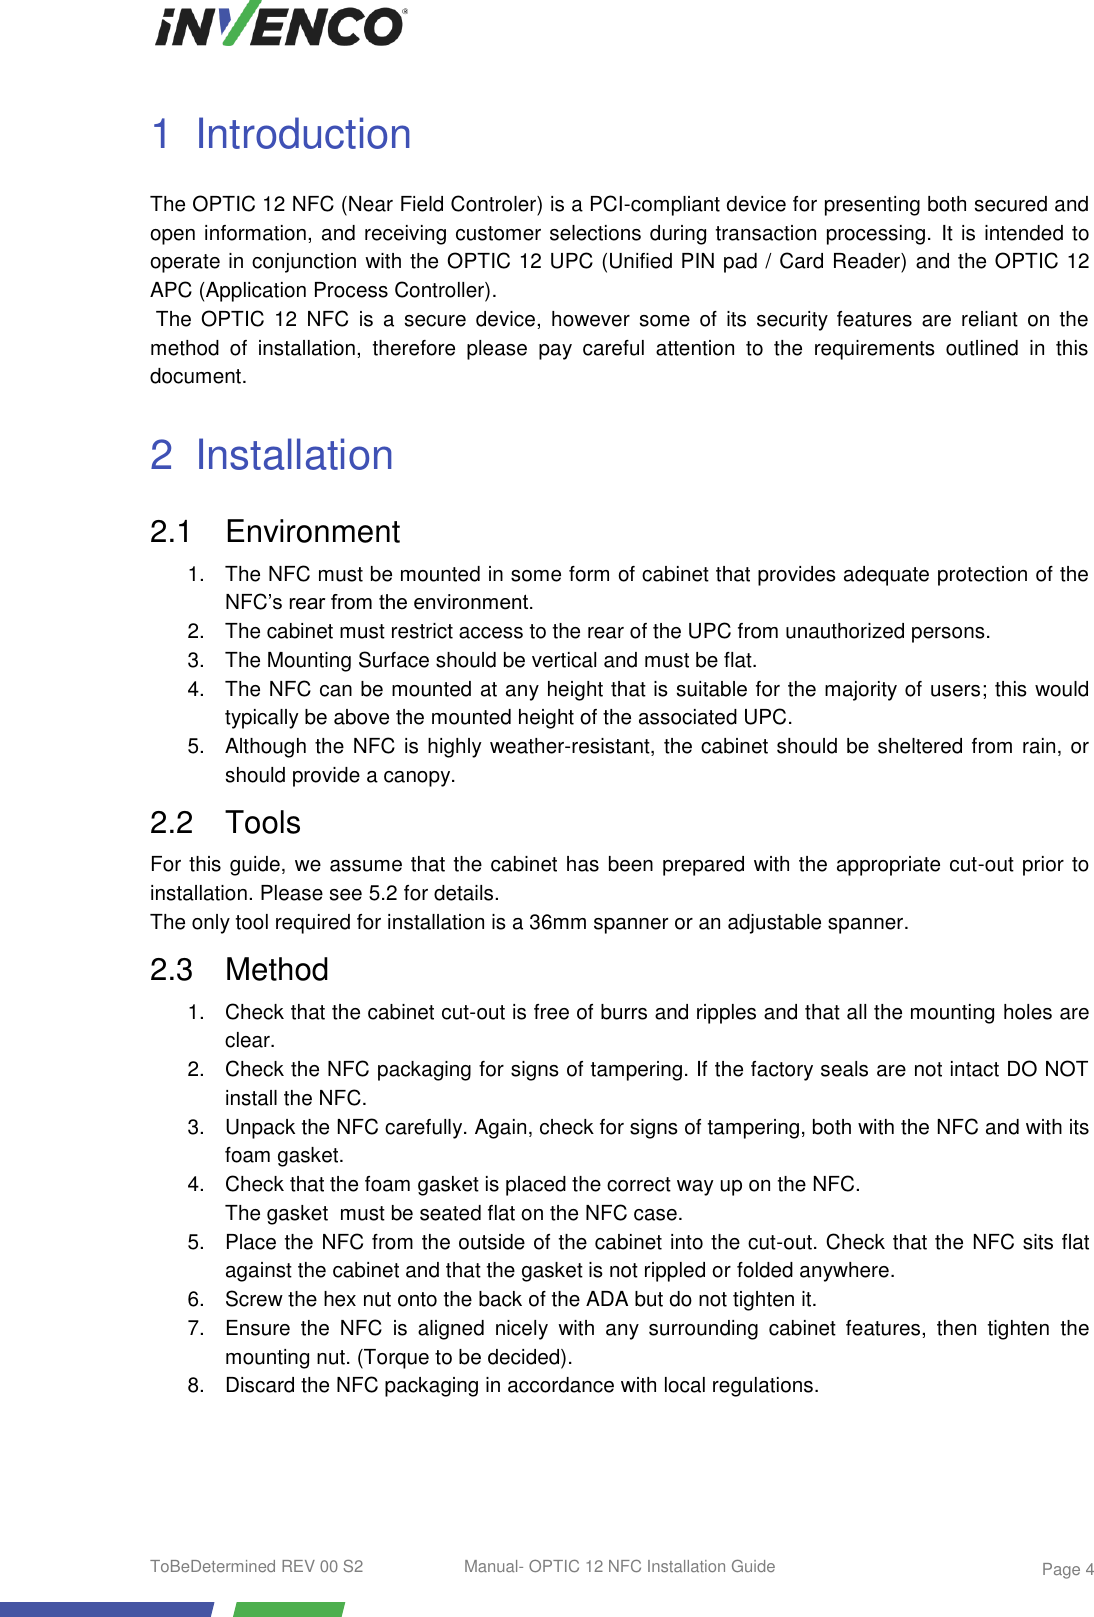  ToBeDetermined REV 00 S2  Manual- OPTIC 12 NFC Installation Guide    Page 4 1  Introduction The OPTIC 12 NFC (Near Field Controler) is a PCI-compliant device for presenting both secured and open information, and receiving customer selections during transaction processing. It is intended to operate in conjunction with the OPTIC 12 UPC (Unified PIN pad / Card Reader) and the OPTIC 12 APC (Application Process Controller).  The  OPTIC  12  NFC  is  a  secure  device,  however  some  of  its  security features  are  reliant  on the method  of  installation,  therefore  please  pay  careful  attention  to  the  requirements  outlined  in  this document. 2  Installation 2.1  Environment 1.  The NFC must be mounted in some form of cabinet that provides adequate protection of the NFC’s rear from the environment. 2.  The cabinet must restrict access to the rear of the UPC from unauthorized persons. 3.  The Mounting Surface should be vertical and must be flat. 4. The NFC can be mounted at any height that is suitable for the majority of users; this would typically be above the mounted height of the associated UPC. 5.  Although the NFC is highly weather-resistant, the cabinet should be sheltered from rain, or should provide a canopy. 2.2  Tools For this guide, we assume that the cabinet has been prepared with the appropriate cut-out prior to installation. Please see 5.2 for details. The only tool required for installation is a 36mm spanner or an adjustable spanner.  2.3  Method 1.  Check that the cabinet cut-out is free of burrs and ripples and that all the mounting holes are clear. 2.  Check the NFC packaging for signs of tampering. If the factory seals are not intact DO NOT install the NFC. 3.  Unpack the NFC carefully. Again, check for signs of tampering, both with the NFC and with its foam gasket. 4.  Check that the foam gasket is placed the correct way up on the NFC.              The gasket  must be seated flat on the NFC case. 5.  Place the NFC from the outside of the cabinet into the cut-out. Check that the NFC sits flat against the cabinet and that the gasket is not rippled or folded anywhere. 6.  Screw the hex nut onto the back of the ADA but do not tighten it.  7.  Ensure  the  NFC  is  aligned  nicely  with  any  surrounding  cabinet  features,  then  tighten  the mounting nut. (Torque to be decided). 8.  Discard the NFC packaging in accordance with local regulations.  